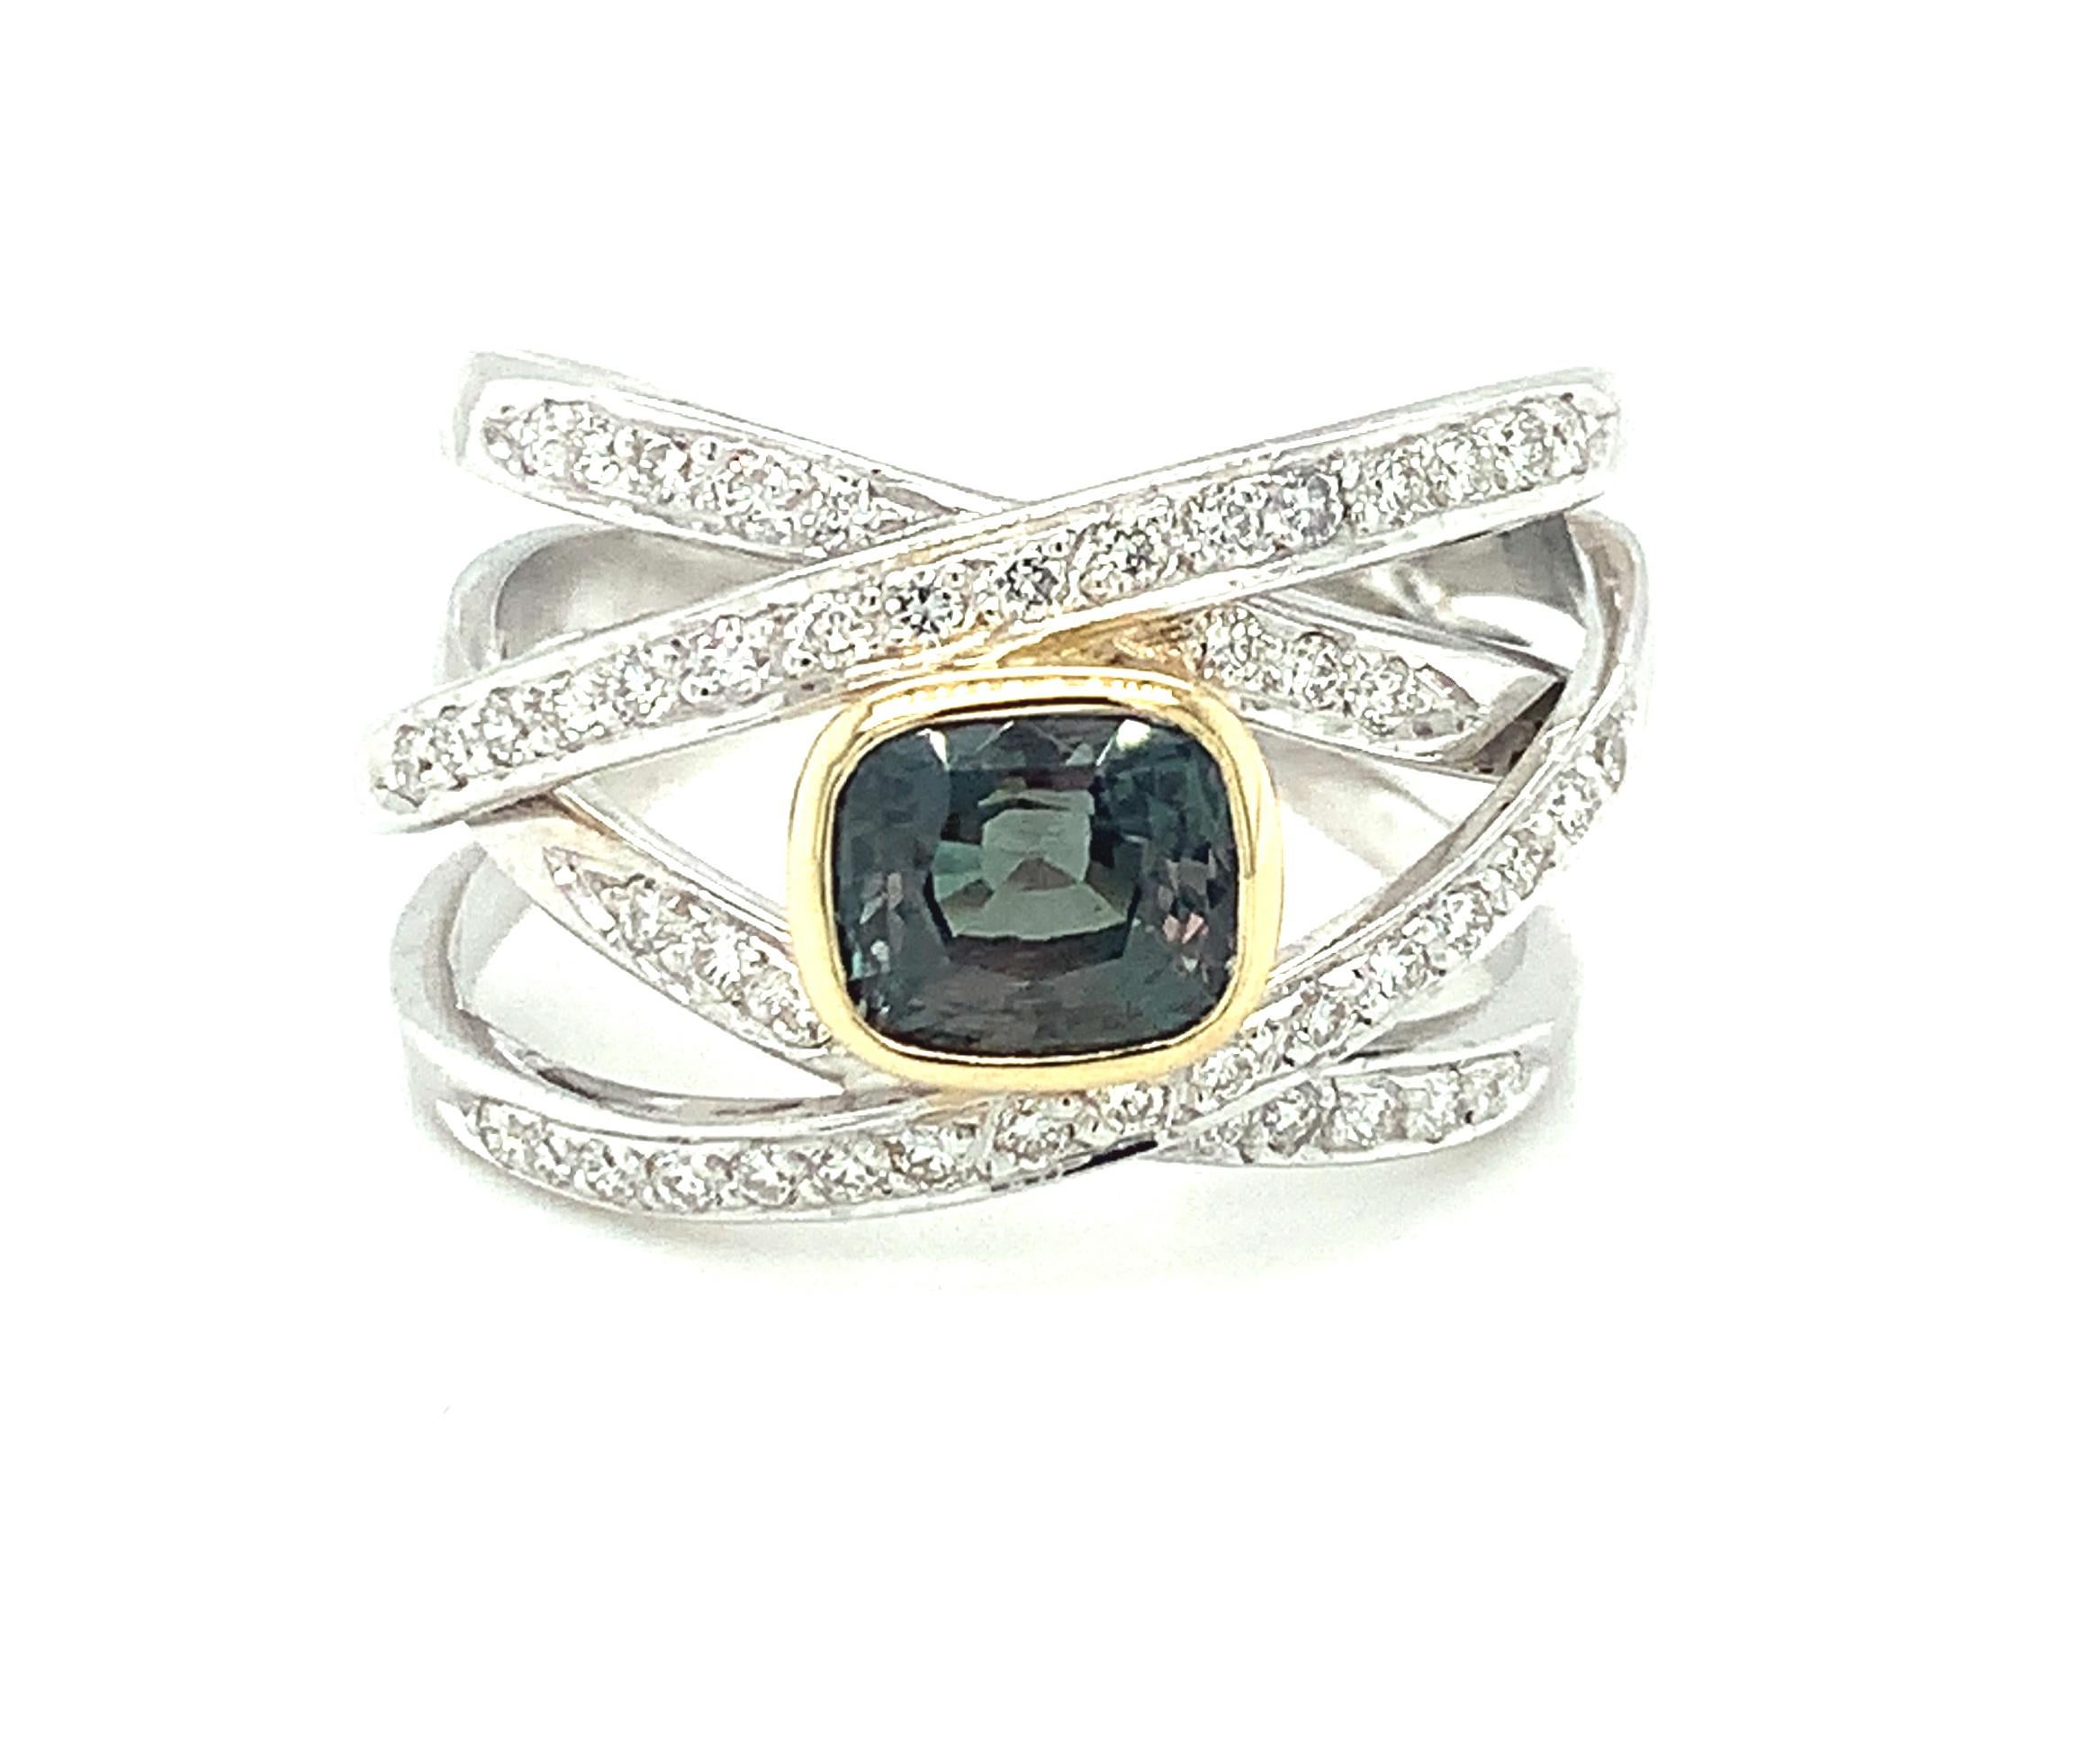 Artisan 1.58 Carat GIA Certified Alexandrite and Diamond Cocktail Ring in 18k Gold For Sale